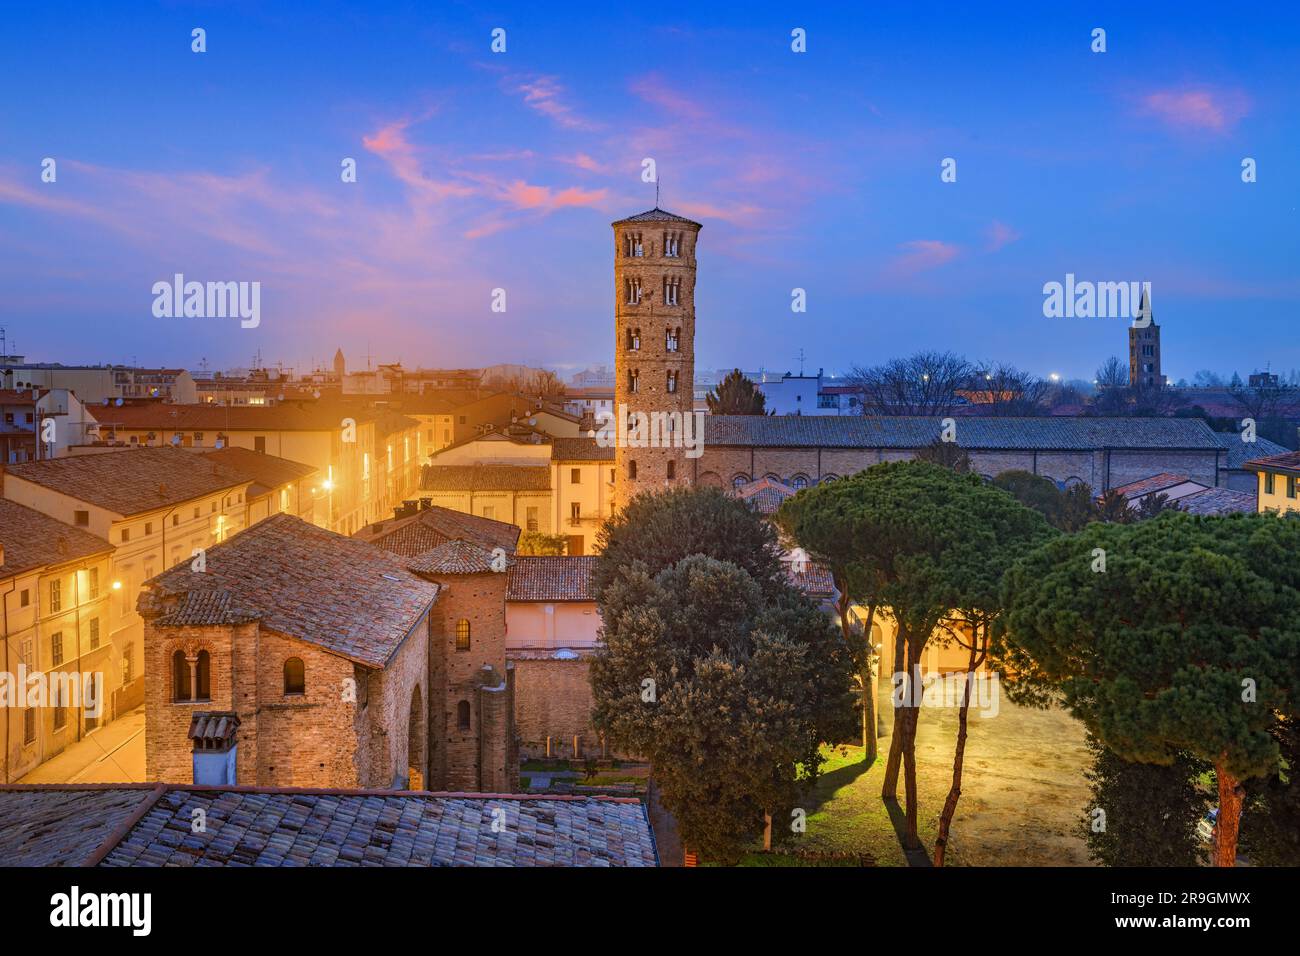 Ravenna, Italy old historic skyline with the Basilica of Sant'Apollinare Nuovo bell tower. Stock Photo